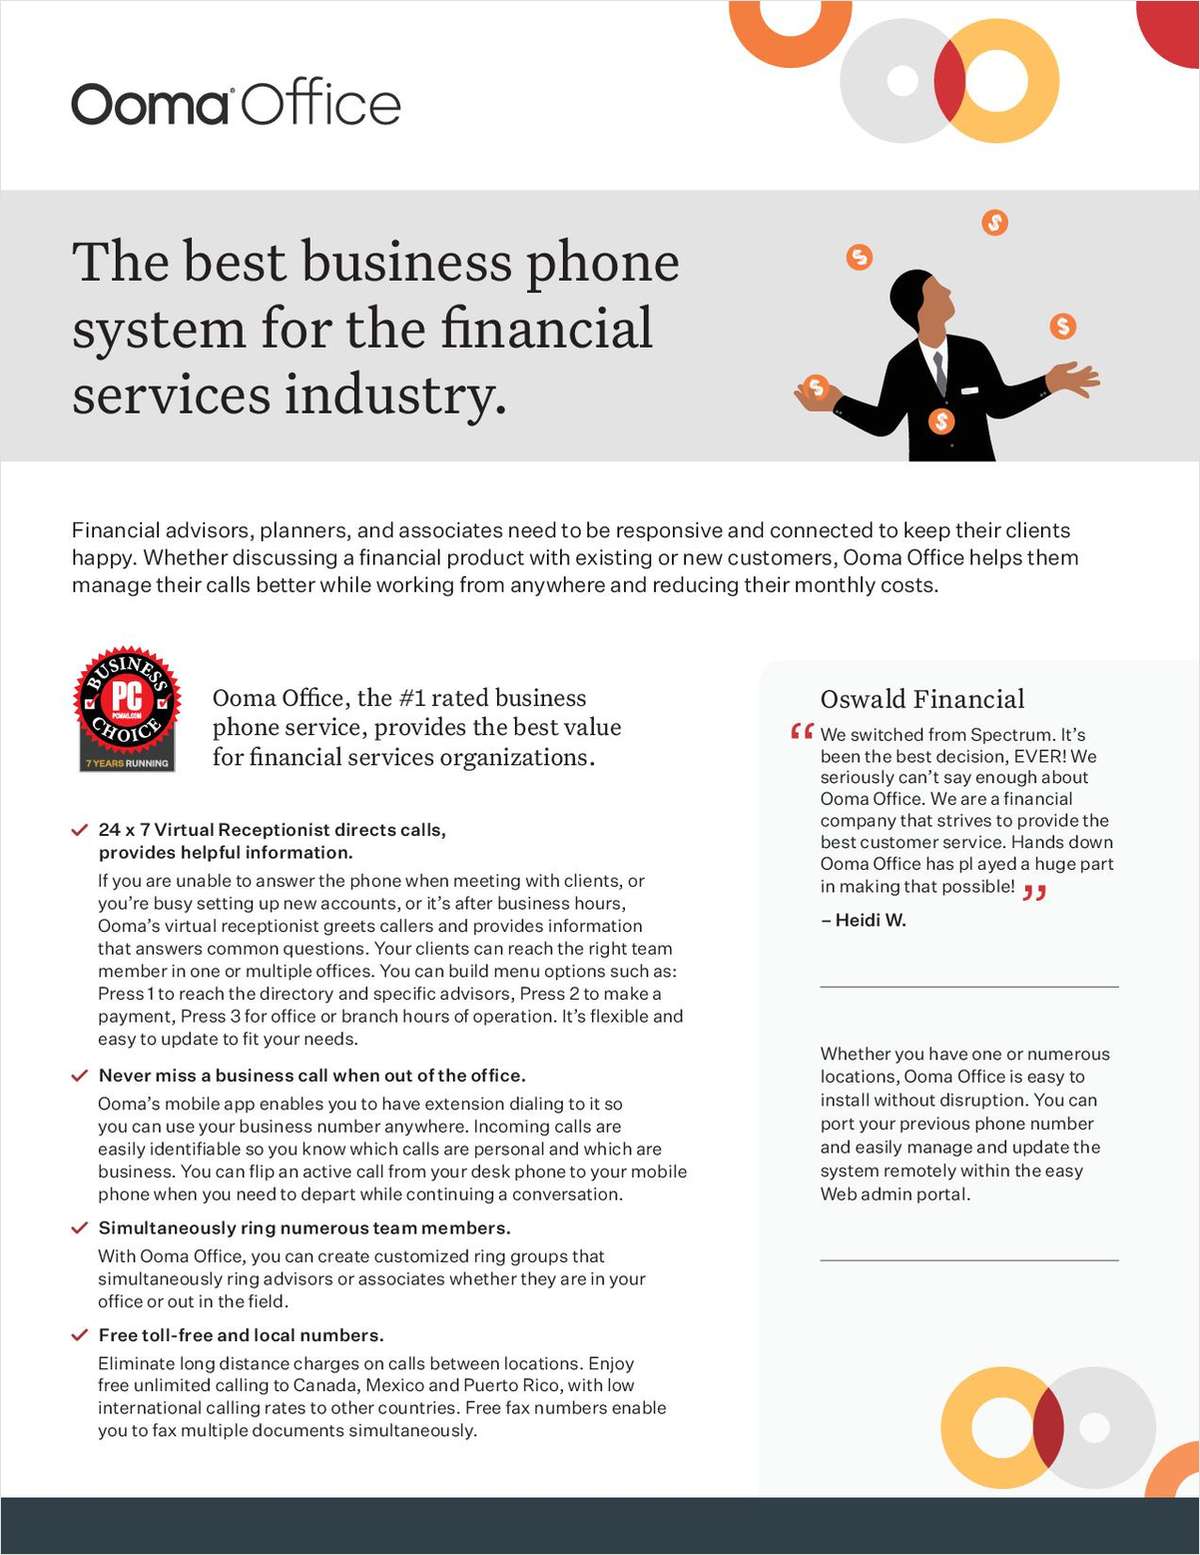 The best business phone system for the financial services industry